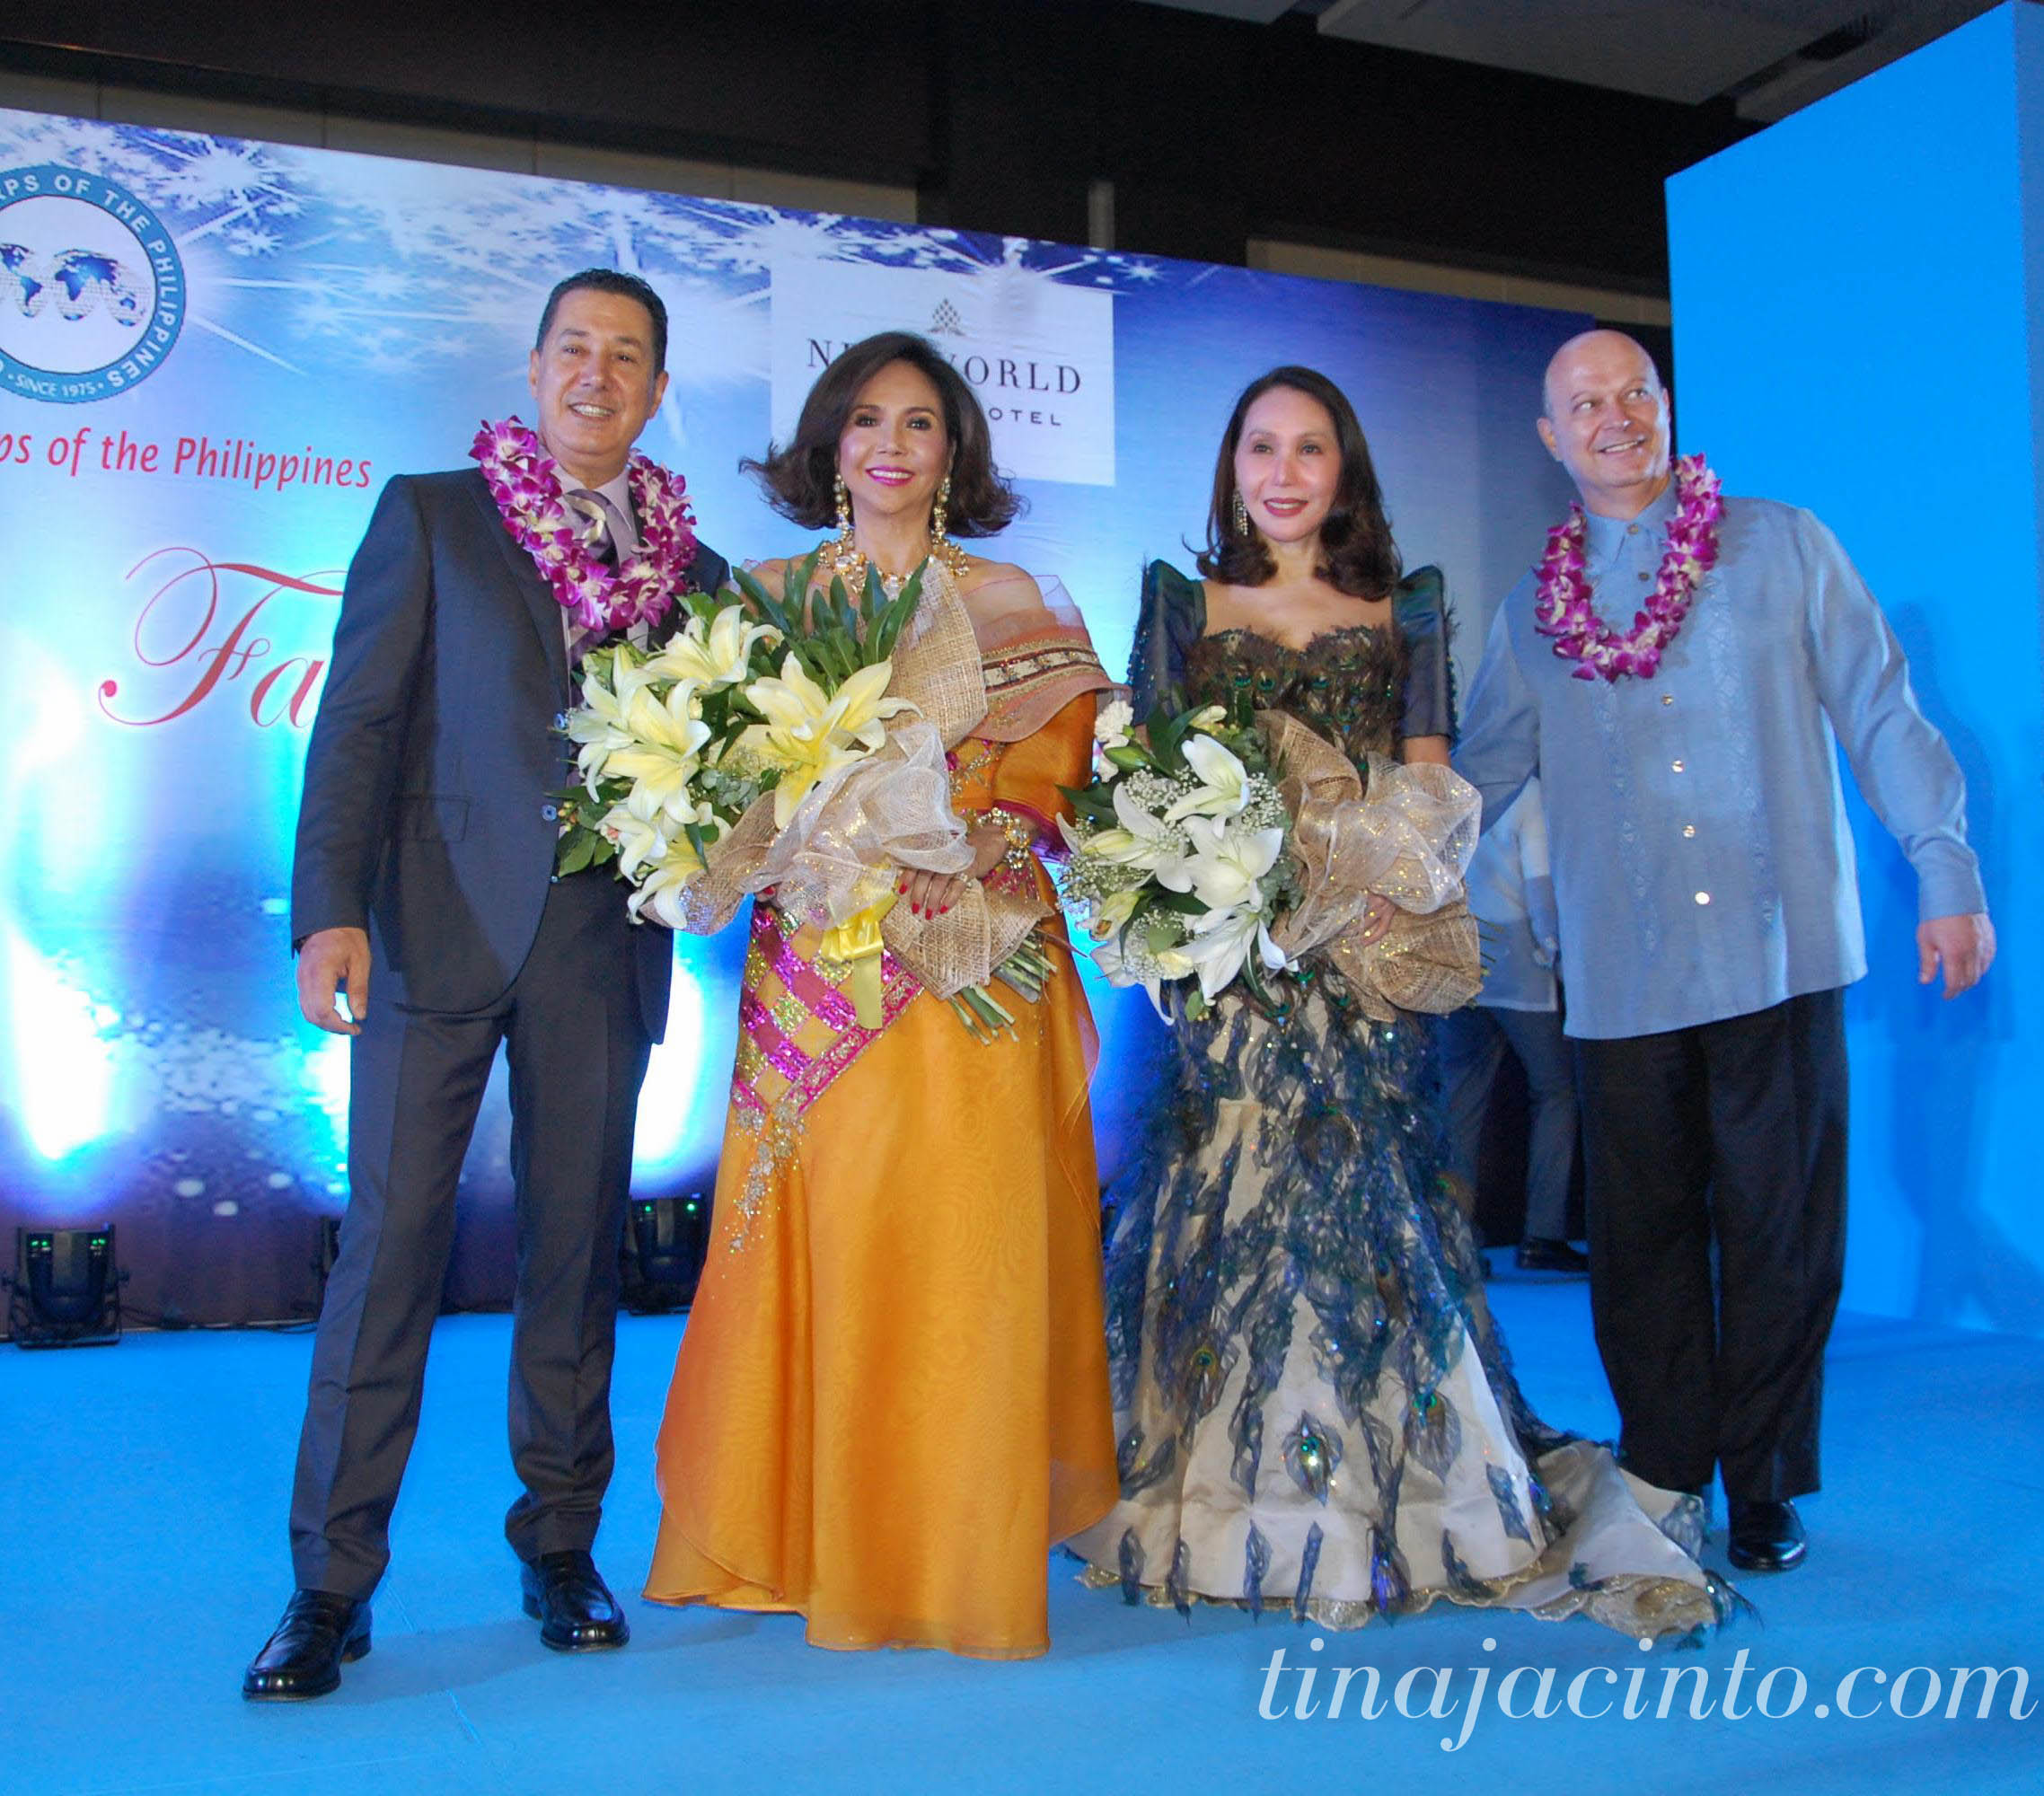 Consular Chic Diplomats Walk the Runway for a Good Cause